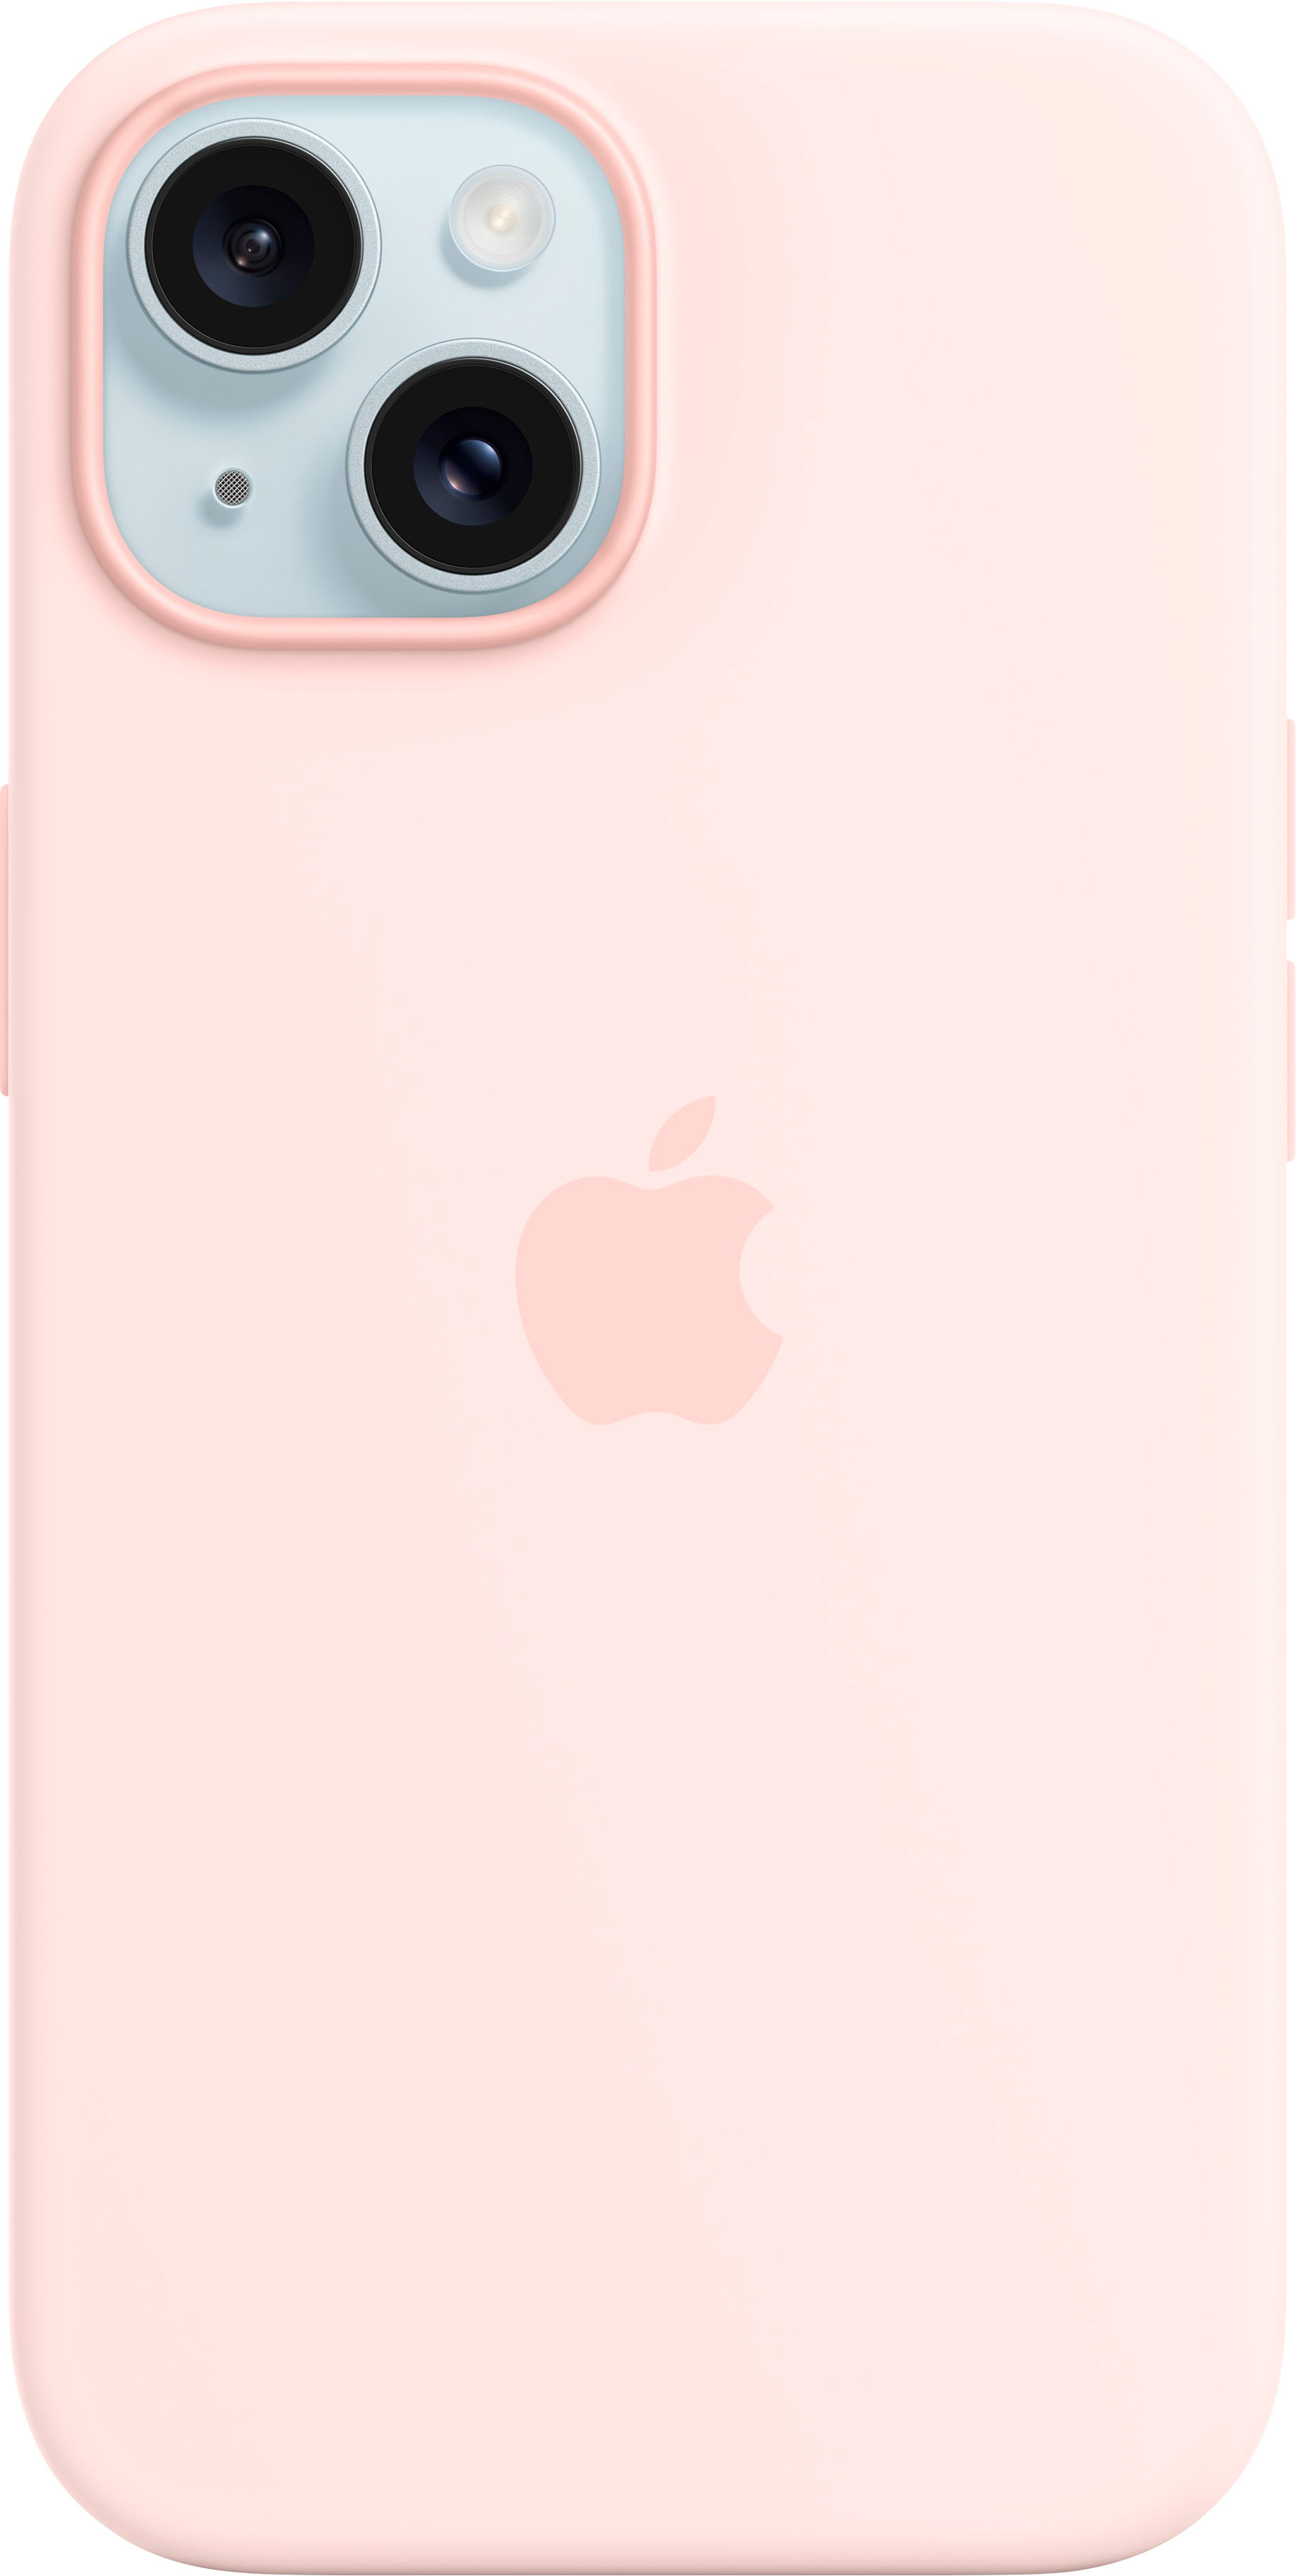 iPhone 11 Pro Max Silicone Case - Pink Sand - Business - Apple (CA)